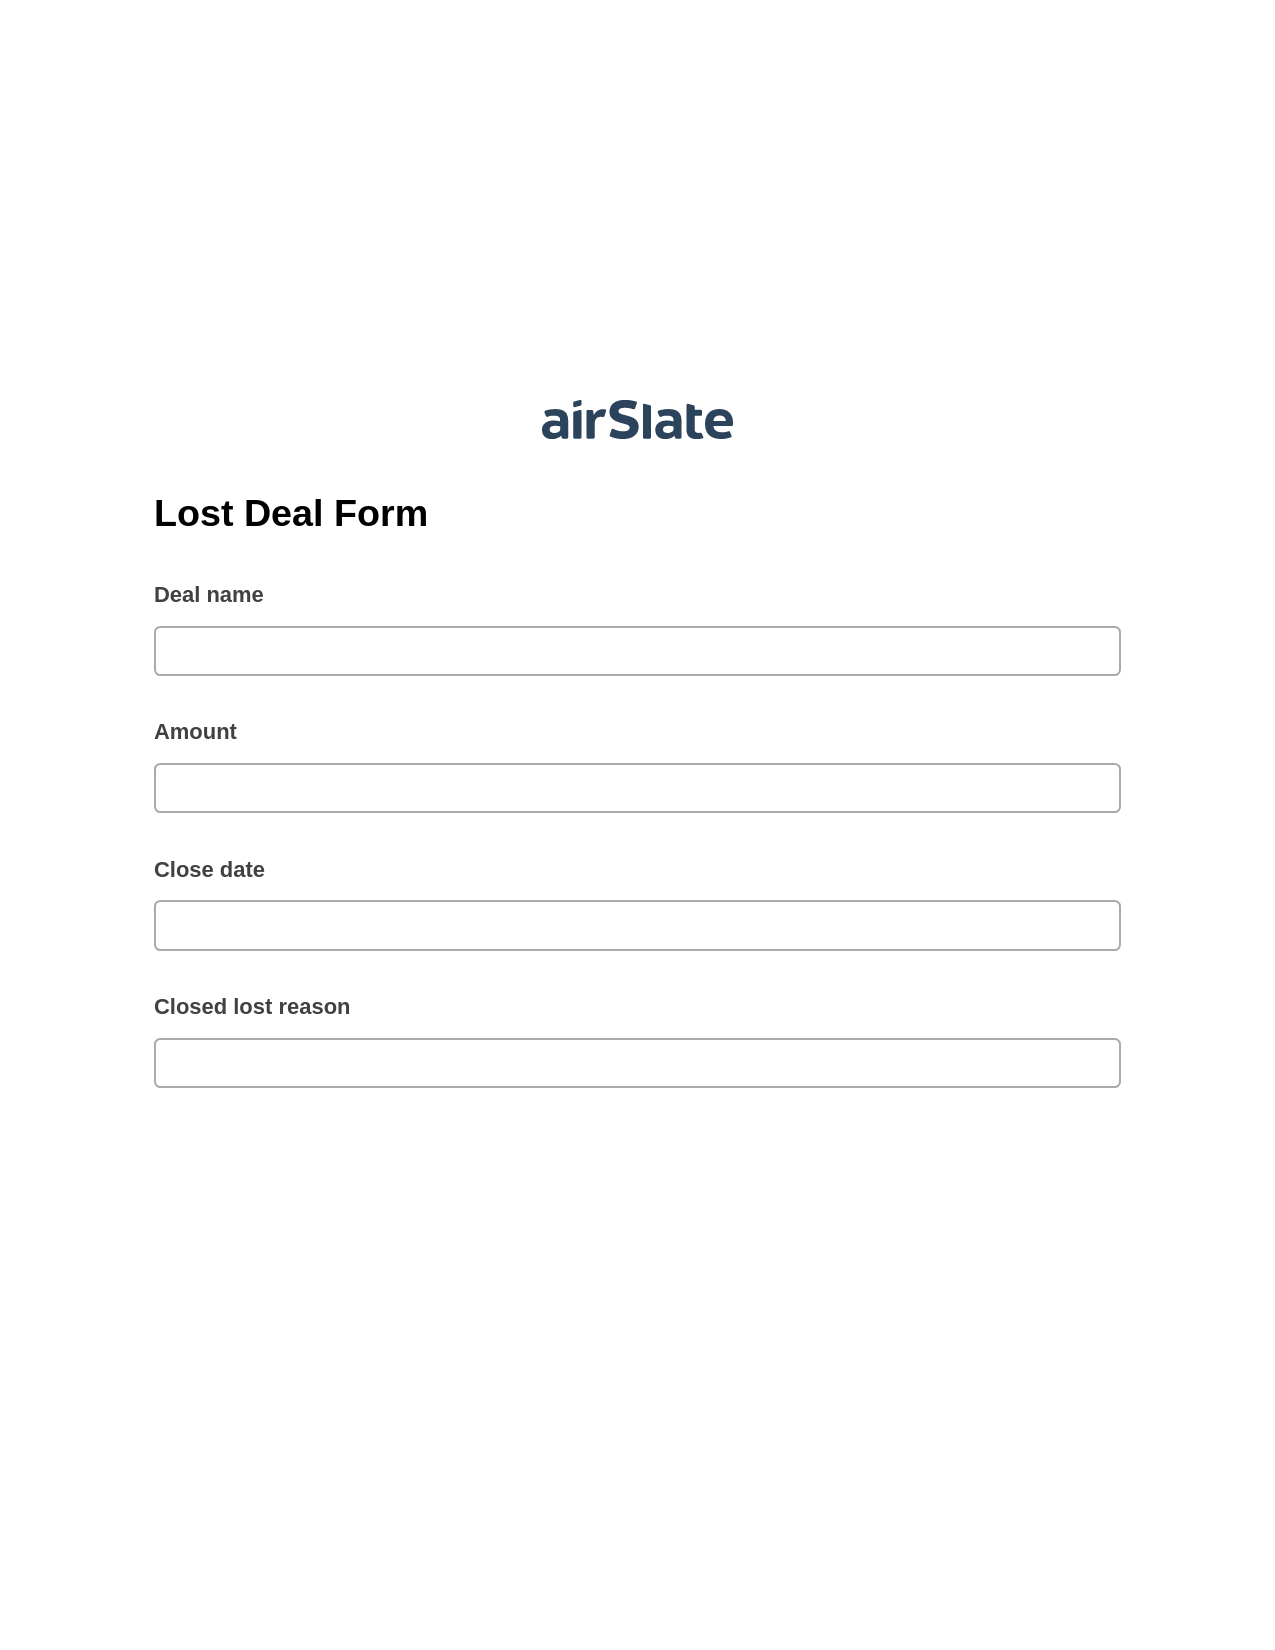 Lost Deal Form Pre-fill from MySQL Bot, Webhook Bot, Archive to OneDrive Bot